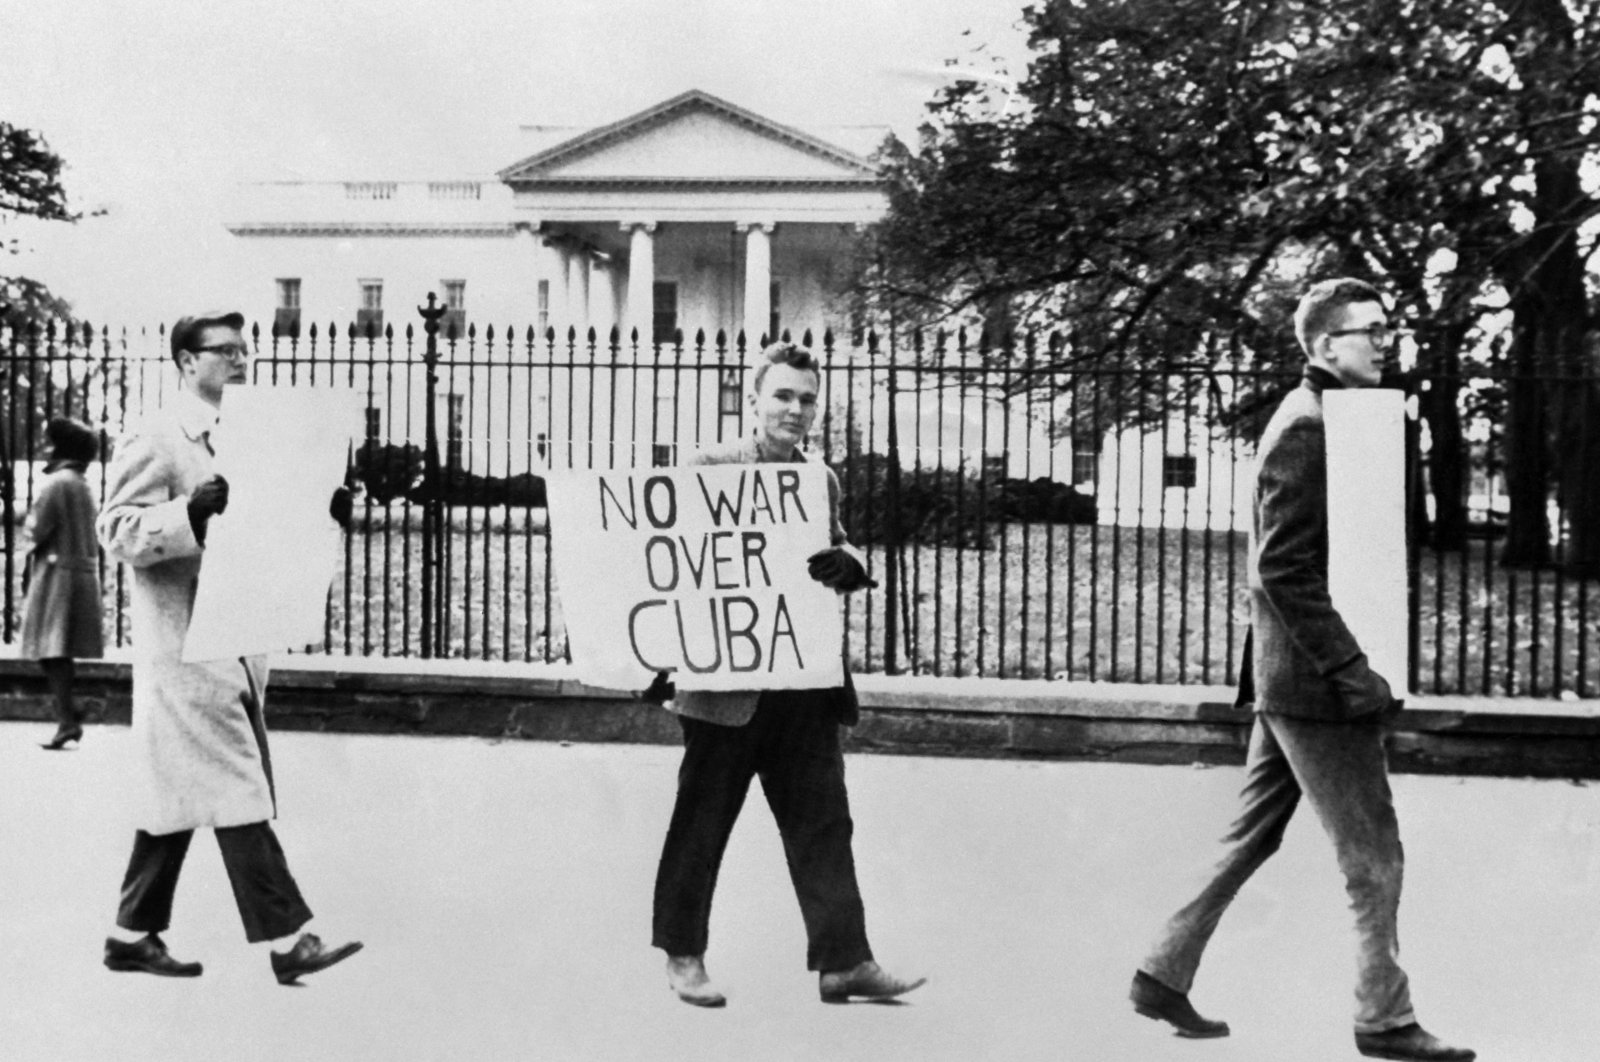 People demonstrate against war during the Cuban missile crisis, in front of the White House in Washington, D.C., U.S., Oct. 27, 1962. (AFP Photo)